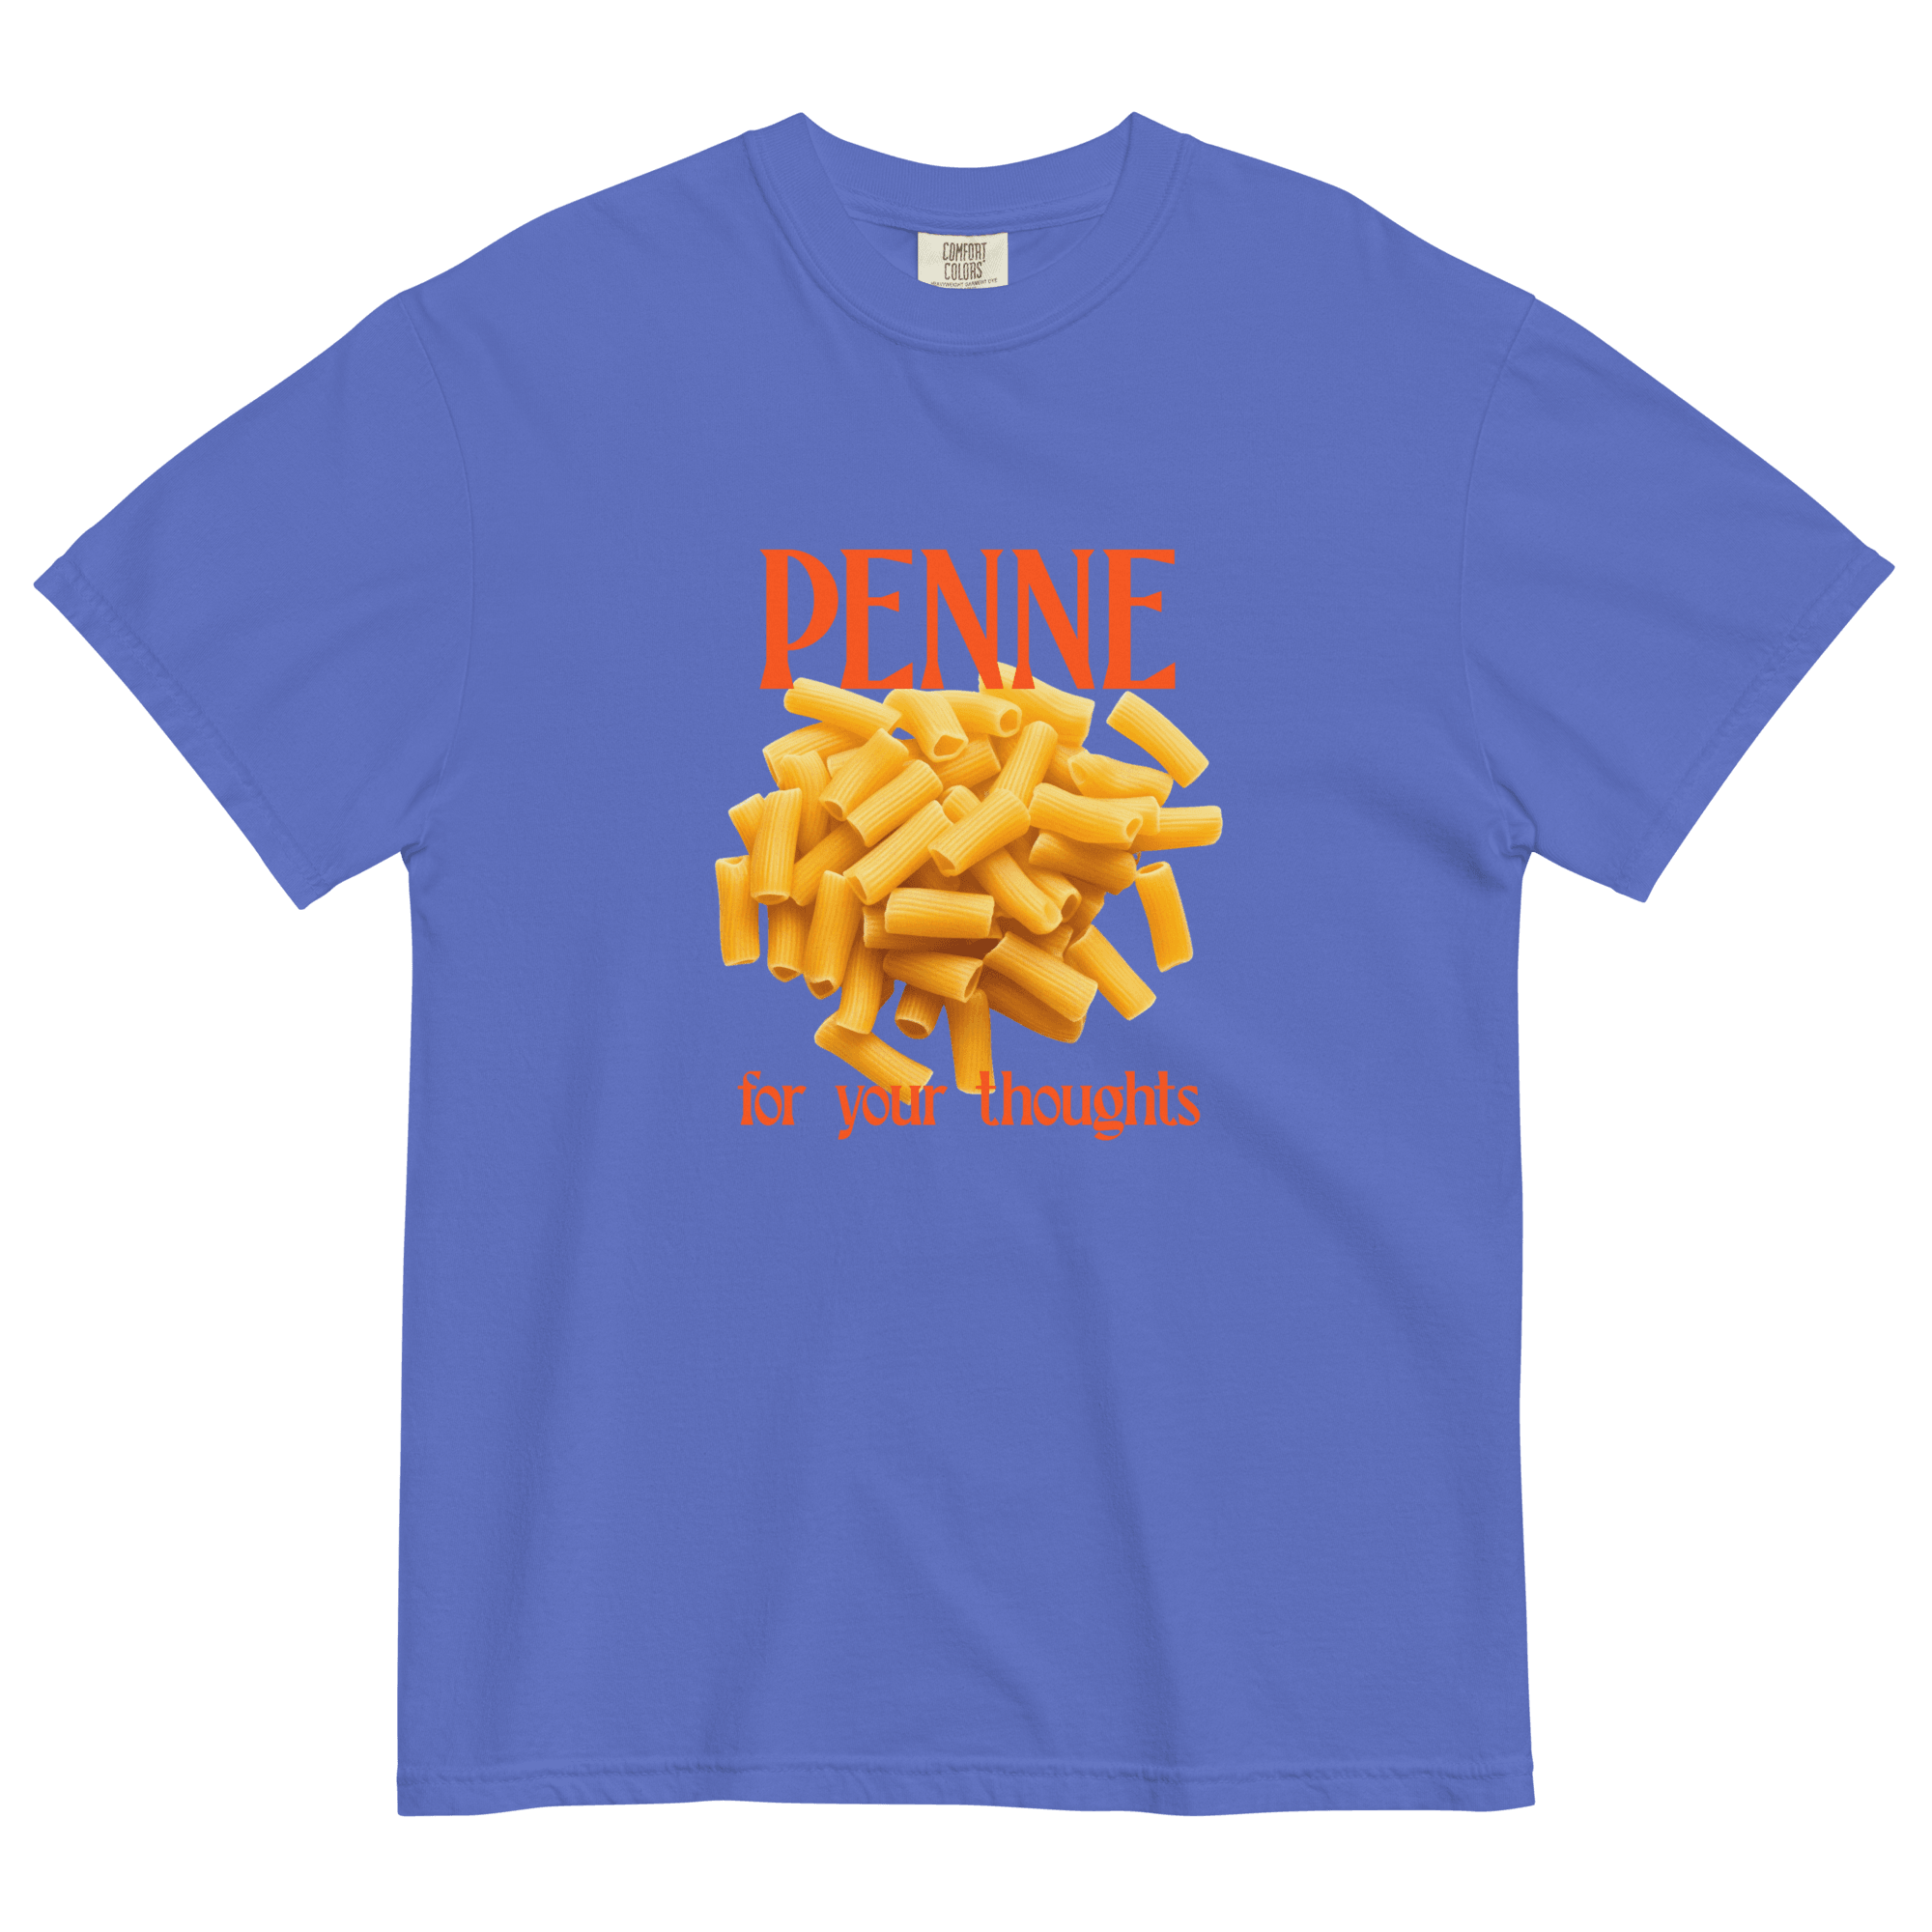 Penne For Your Thoughts T-Shirt - Polychrome Goods 🍊